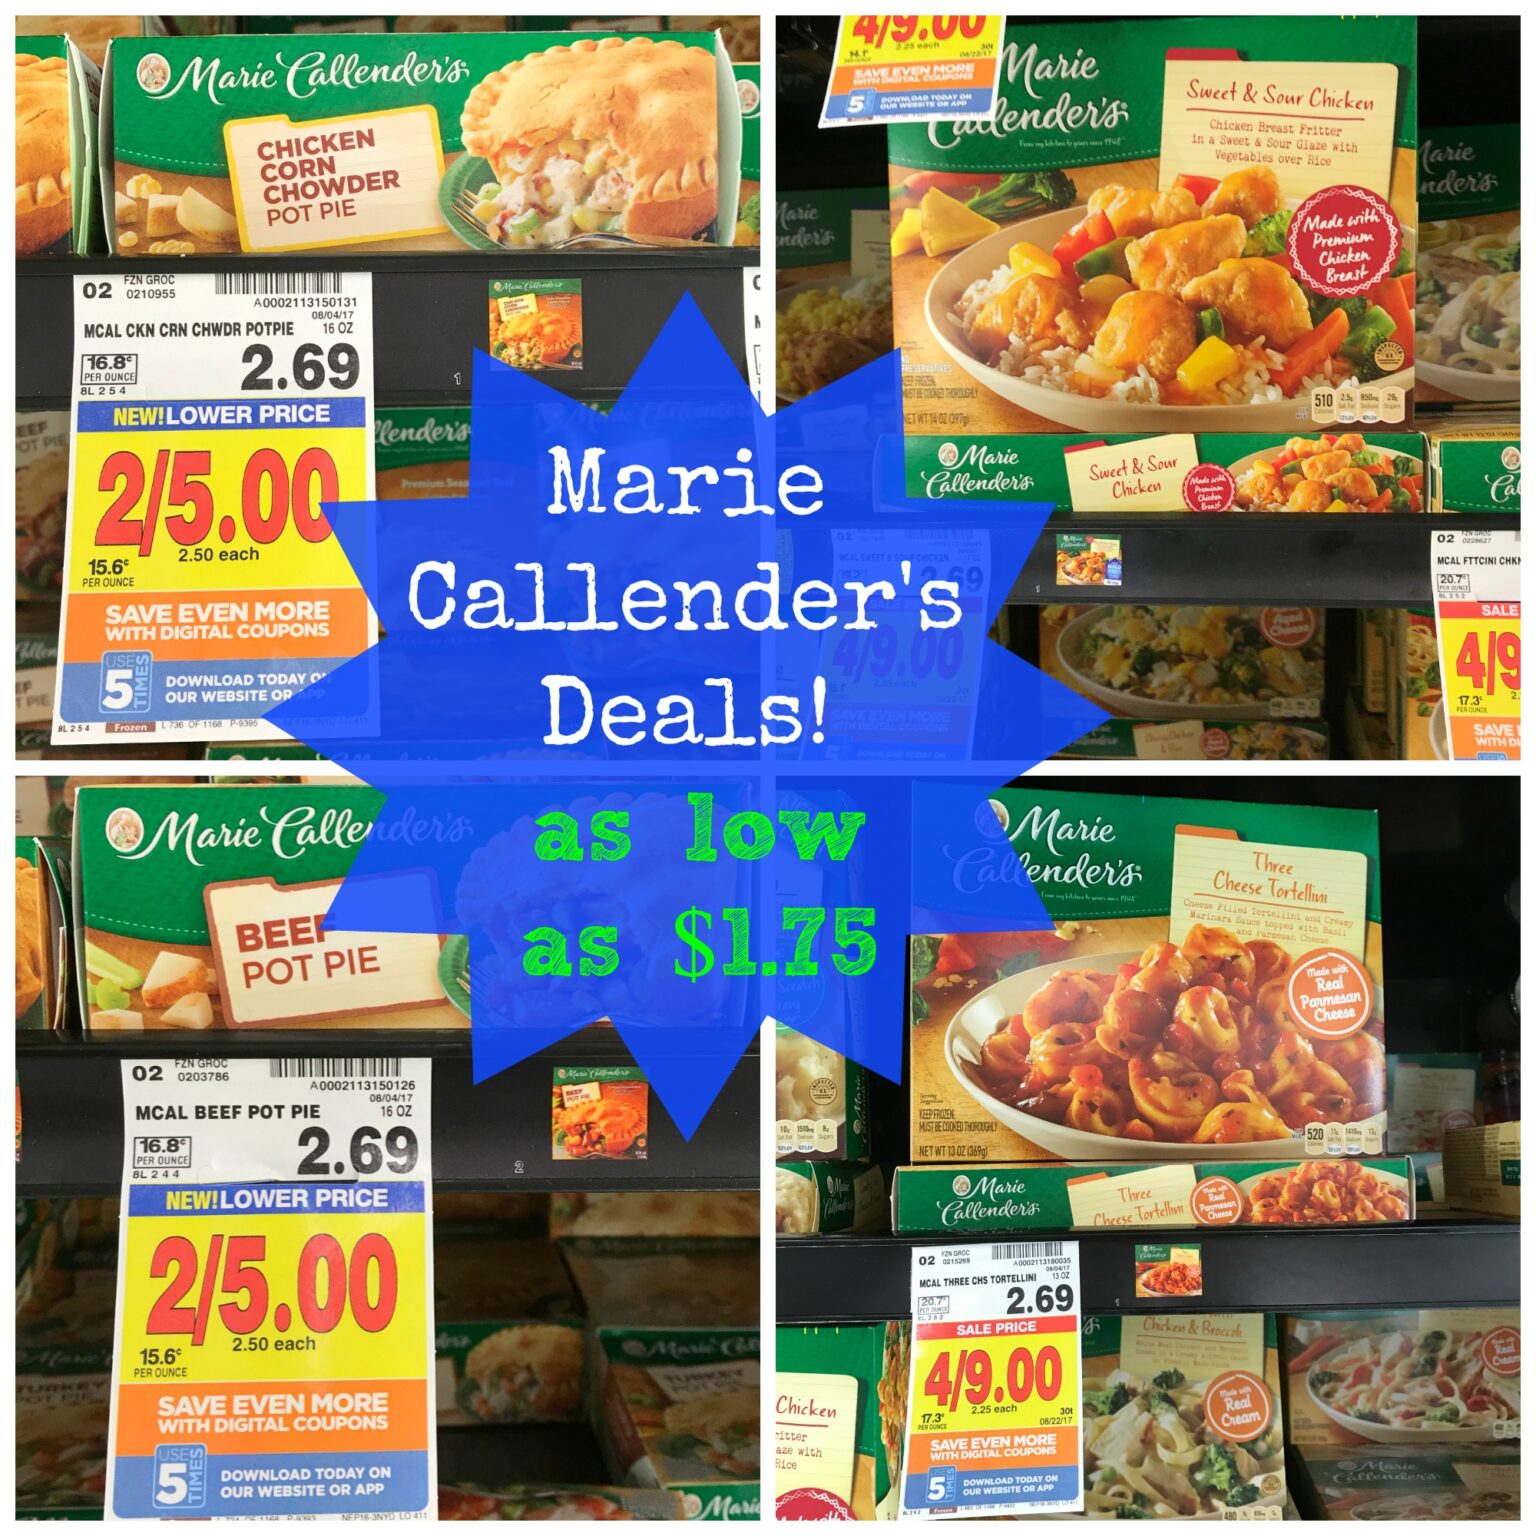 get-marie-callender-s-frozen-items-for-as-low-as-1-75-each-at-kroger